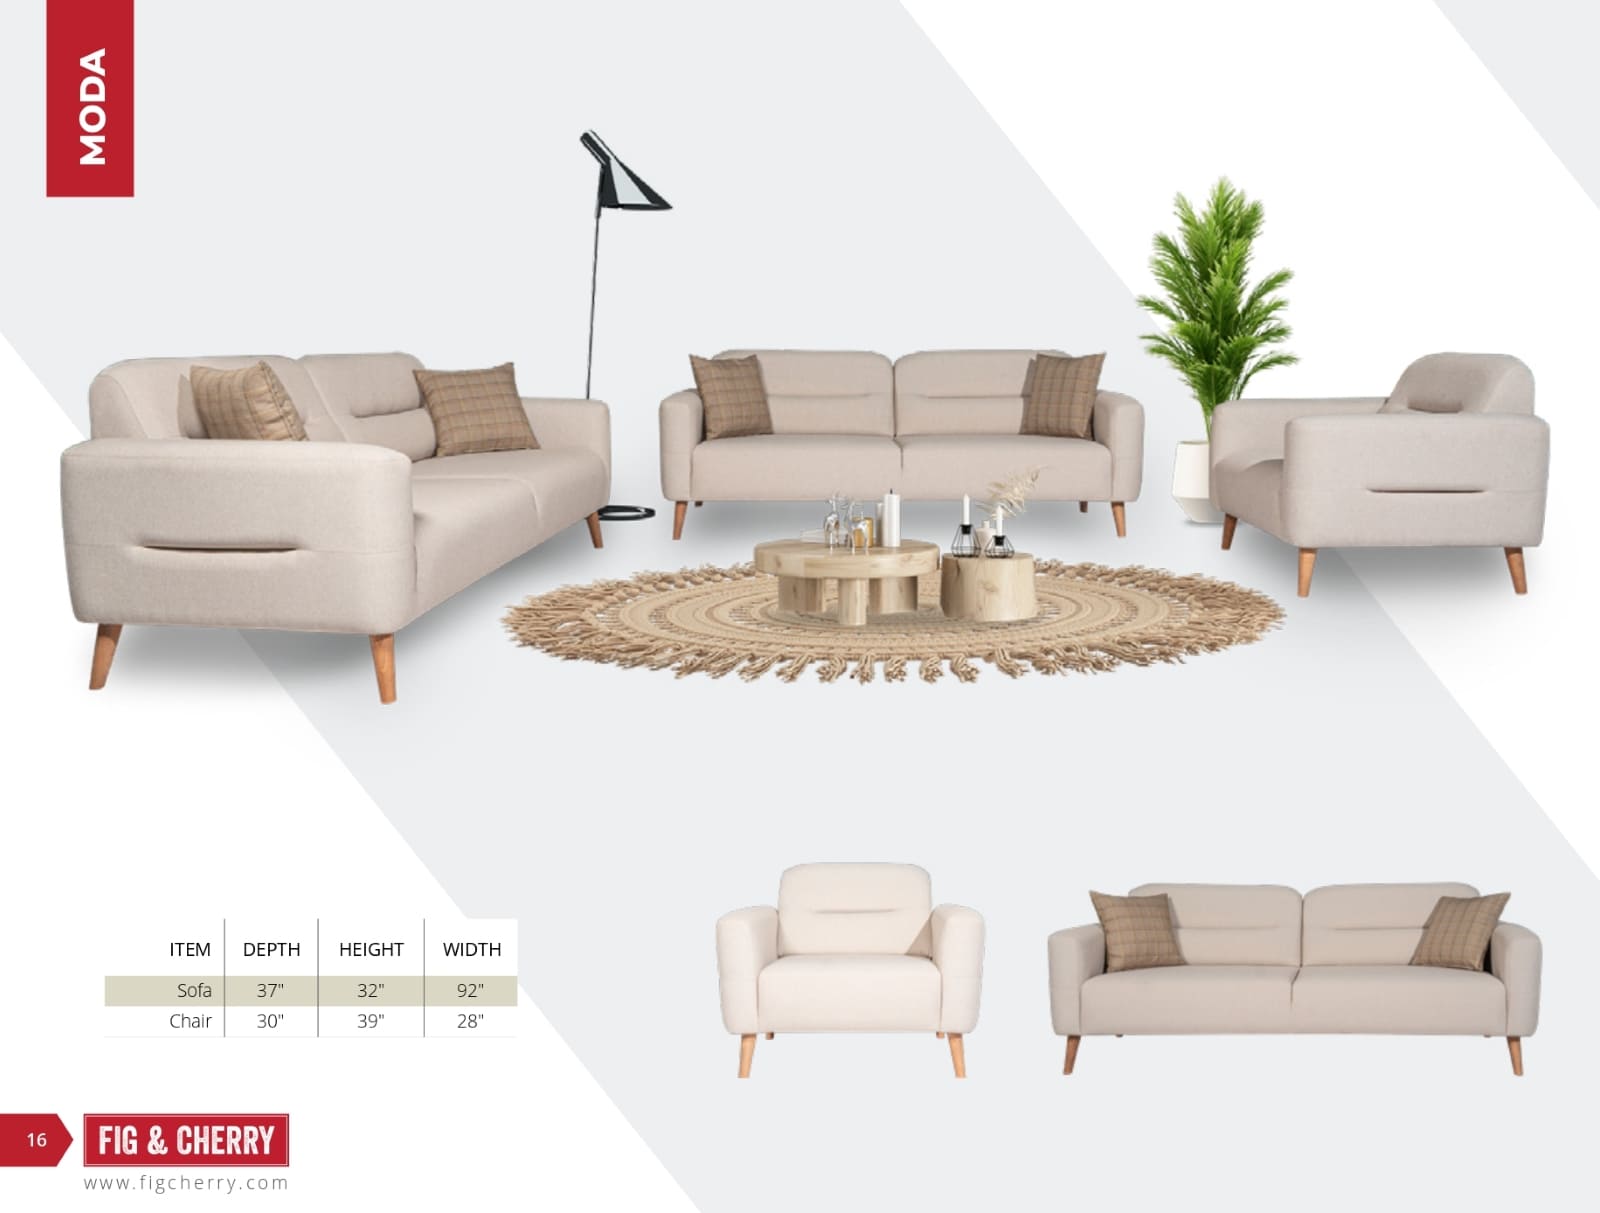 Fig & Cherry Indoor Collection (Sofas and Sectionals) Catalog (16)